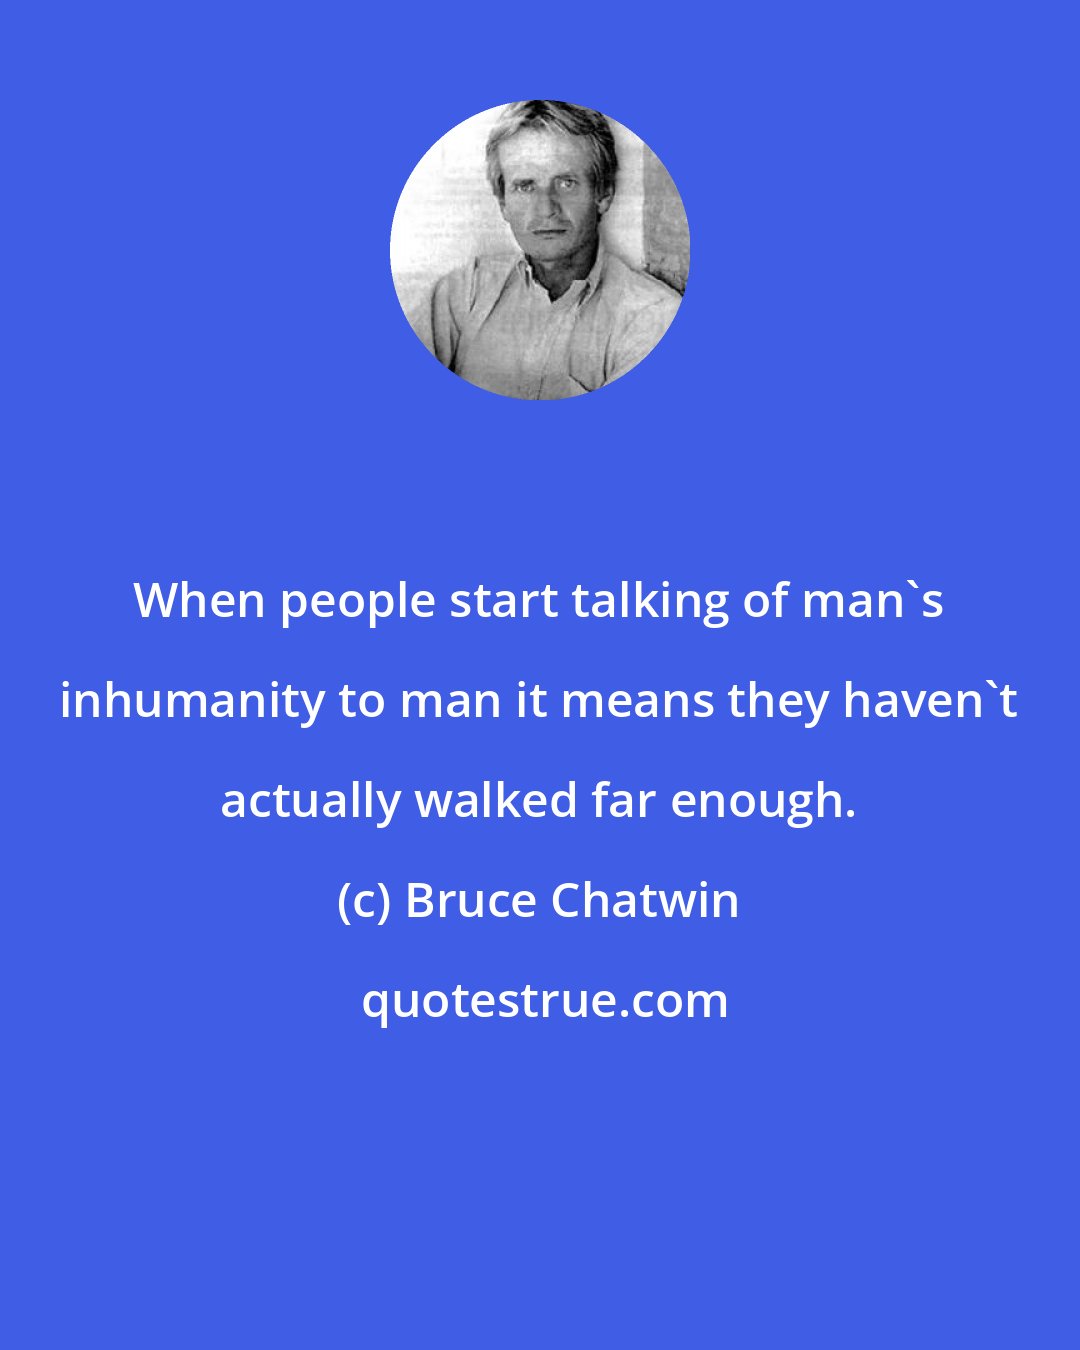 Bruce Chatwin: When people start talking of man's inhumanity to man it means they haven't actually walked far enough.